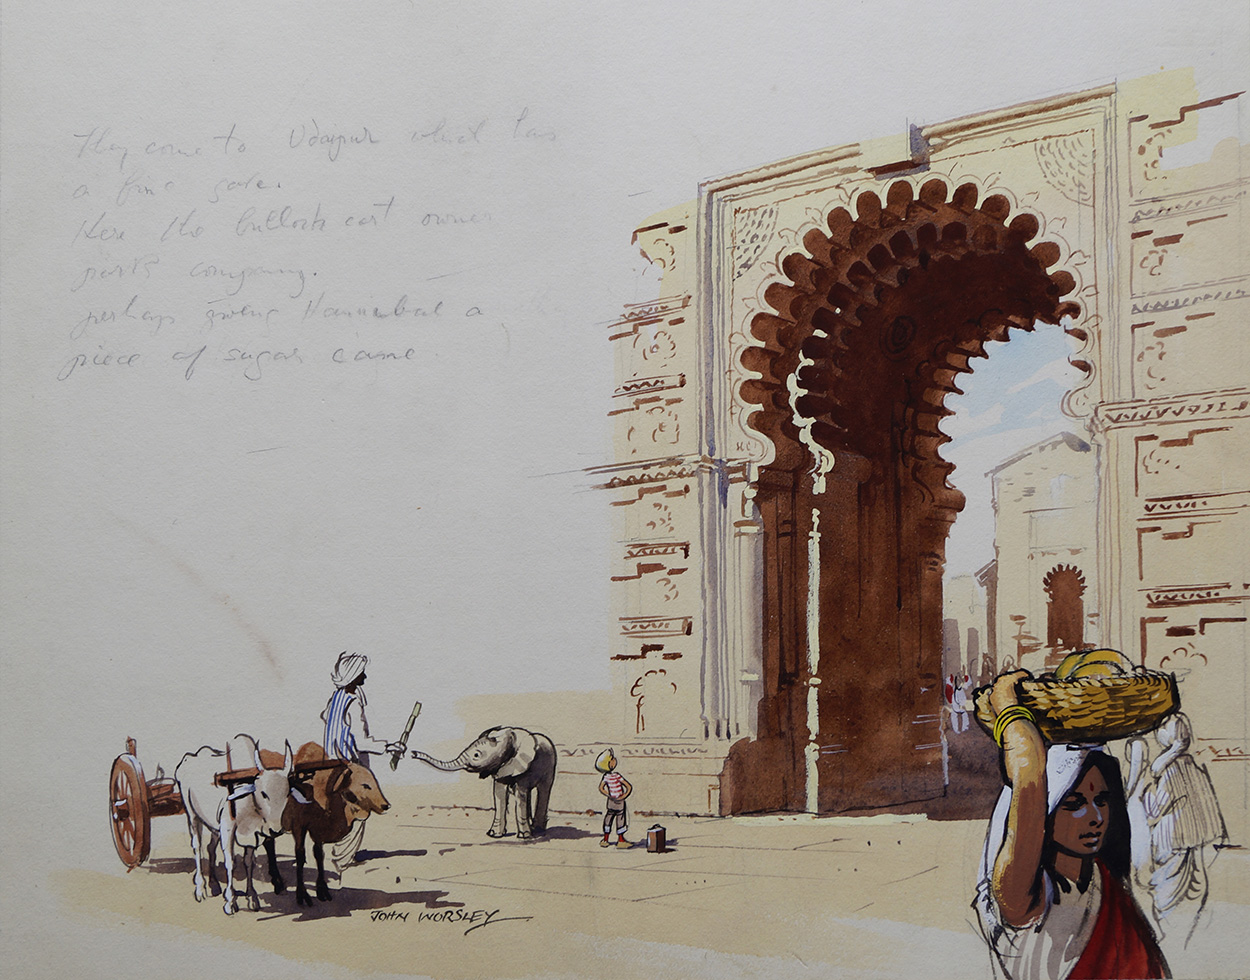 The City Palace at Udaipur (Originals) (Signed) art by Wee Willie Winkie (Worsley) at The Illustration Art Gallery